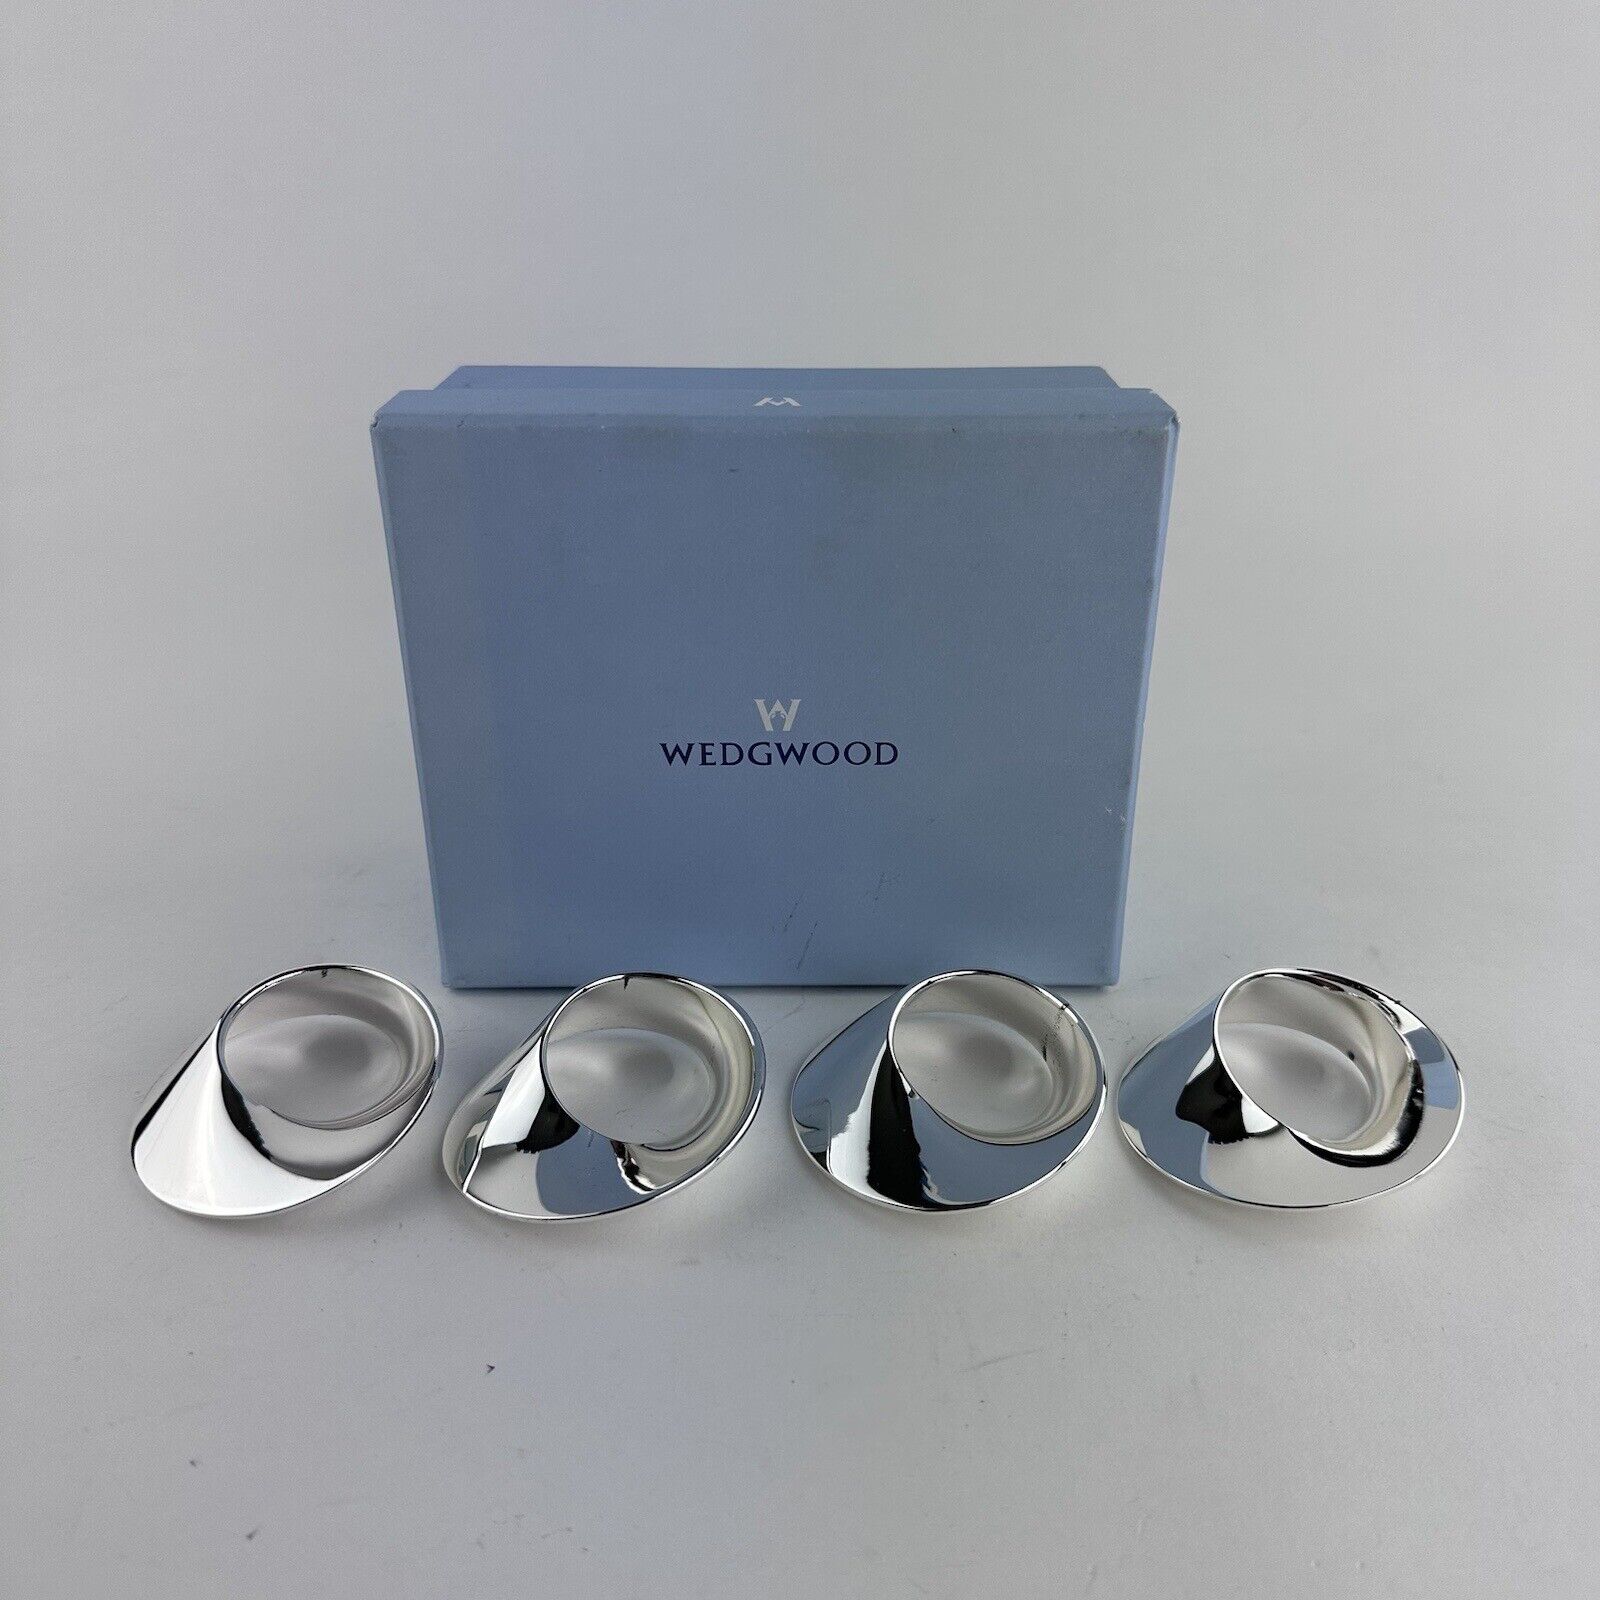 WEDGWOOD Round Silver Plated Twist Napkin Rings Boxed Set of 4 (N1)